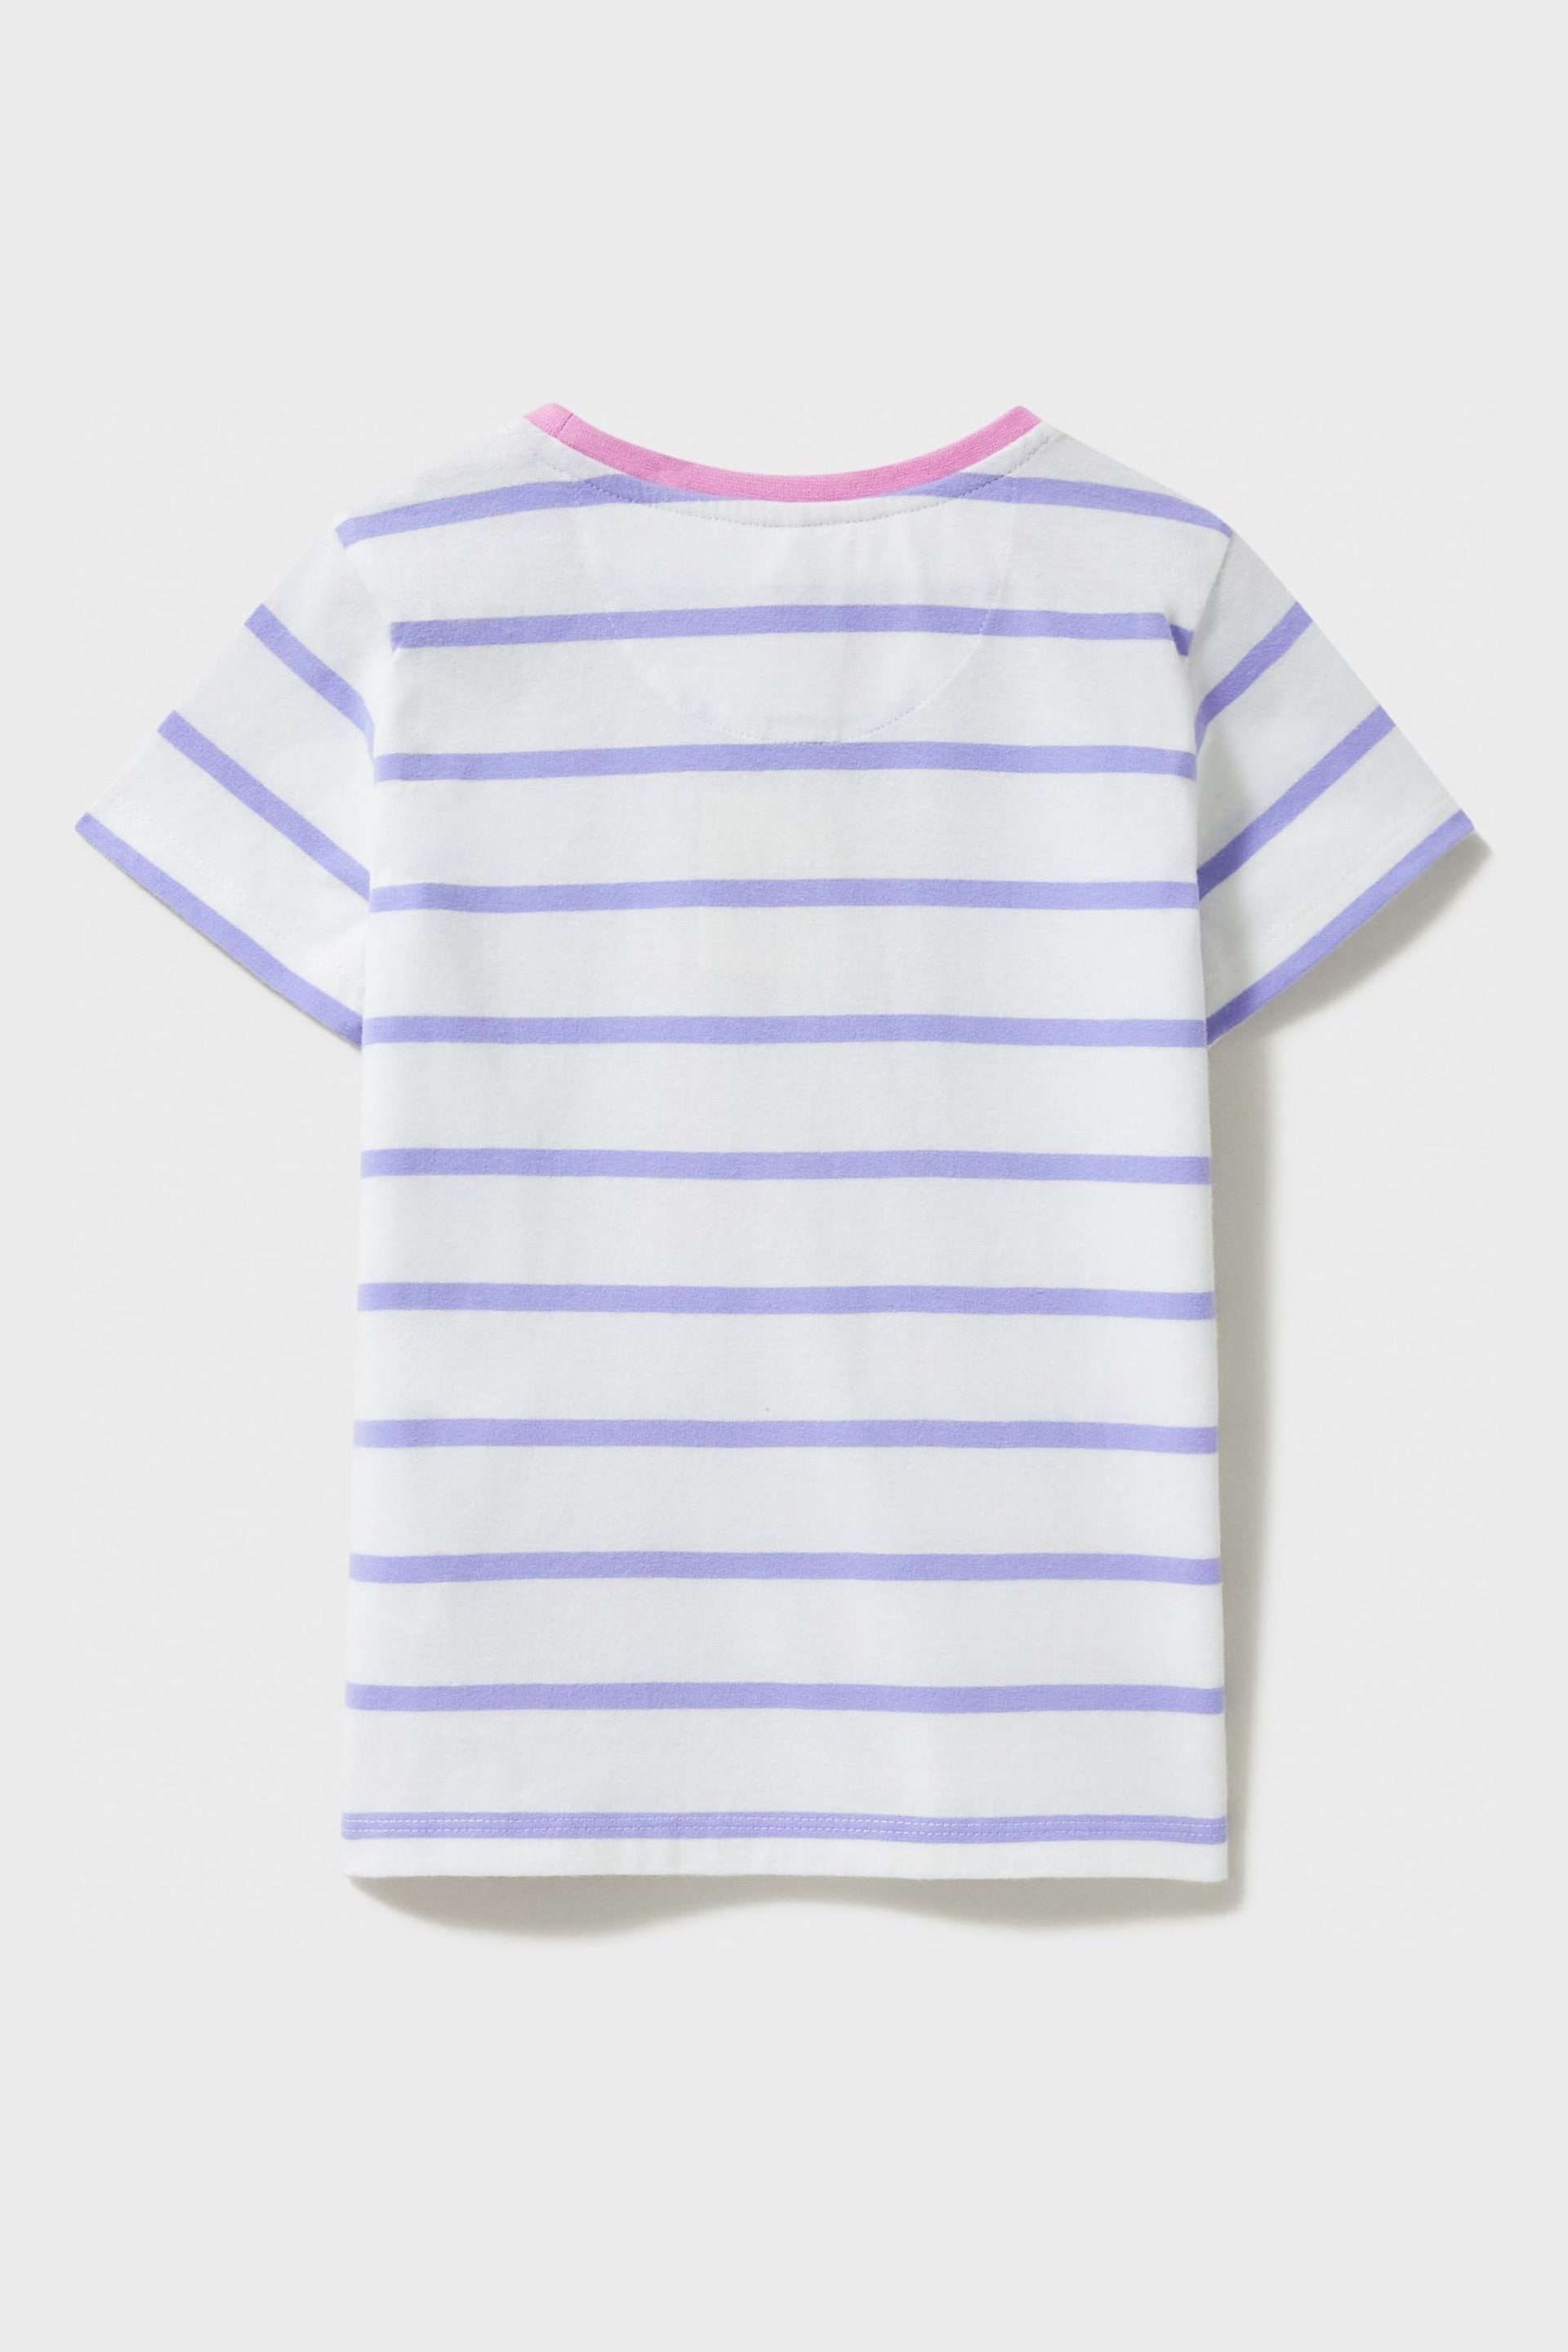 Crew Clothing Seahorse Sequin and Stripe Cotton T-Shirt - Image 2 of 3